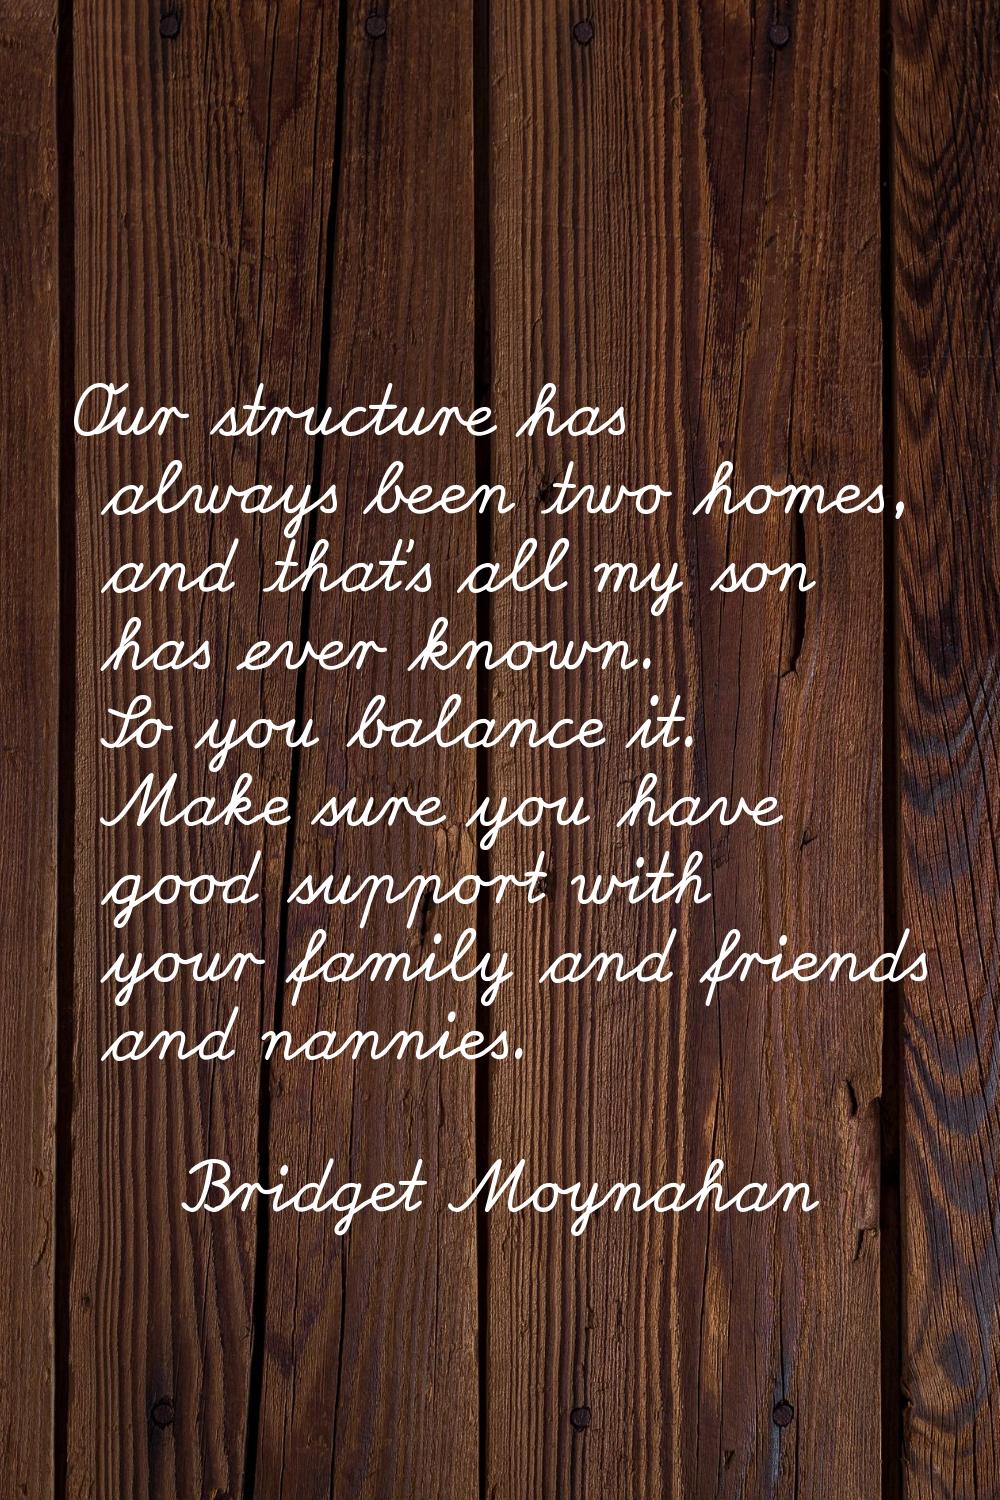 Our structure has always been two homes, and that's all my son has ever known. So you balance it. M